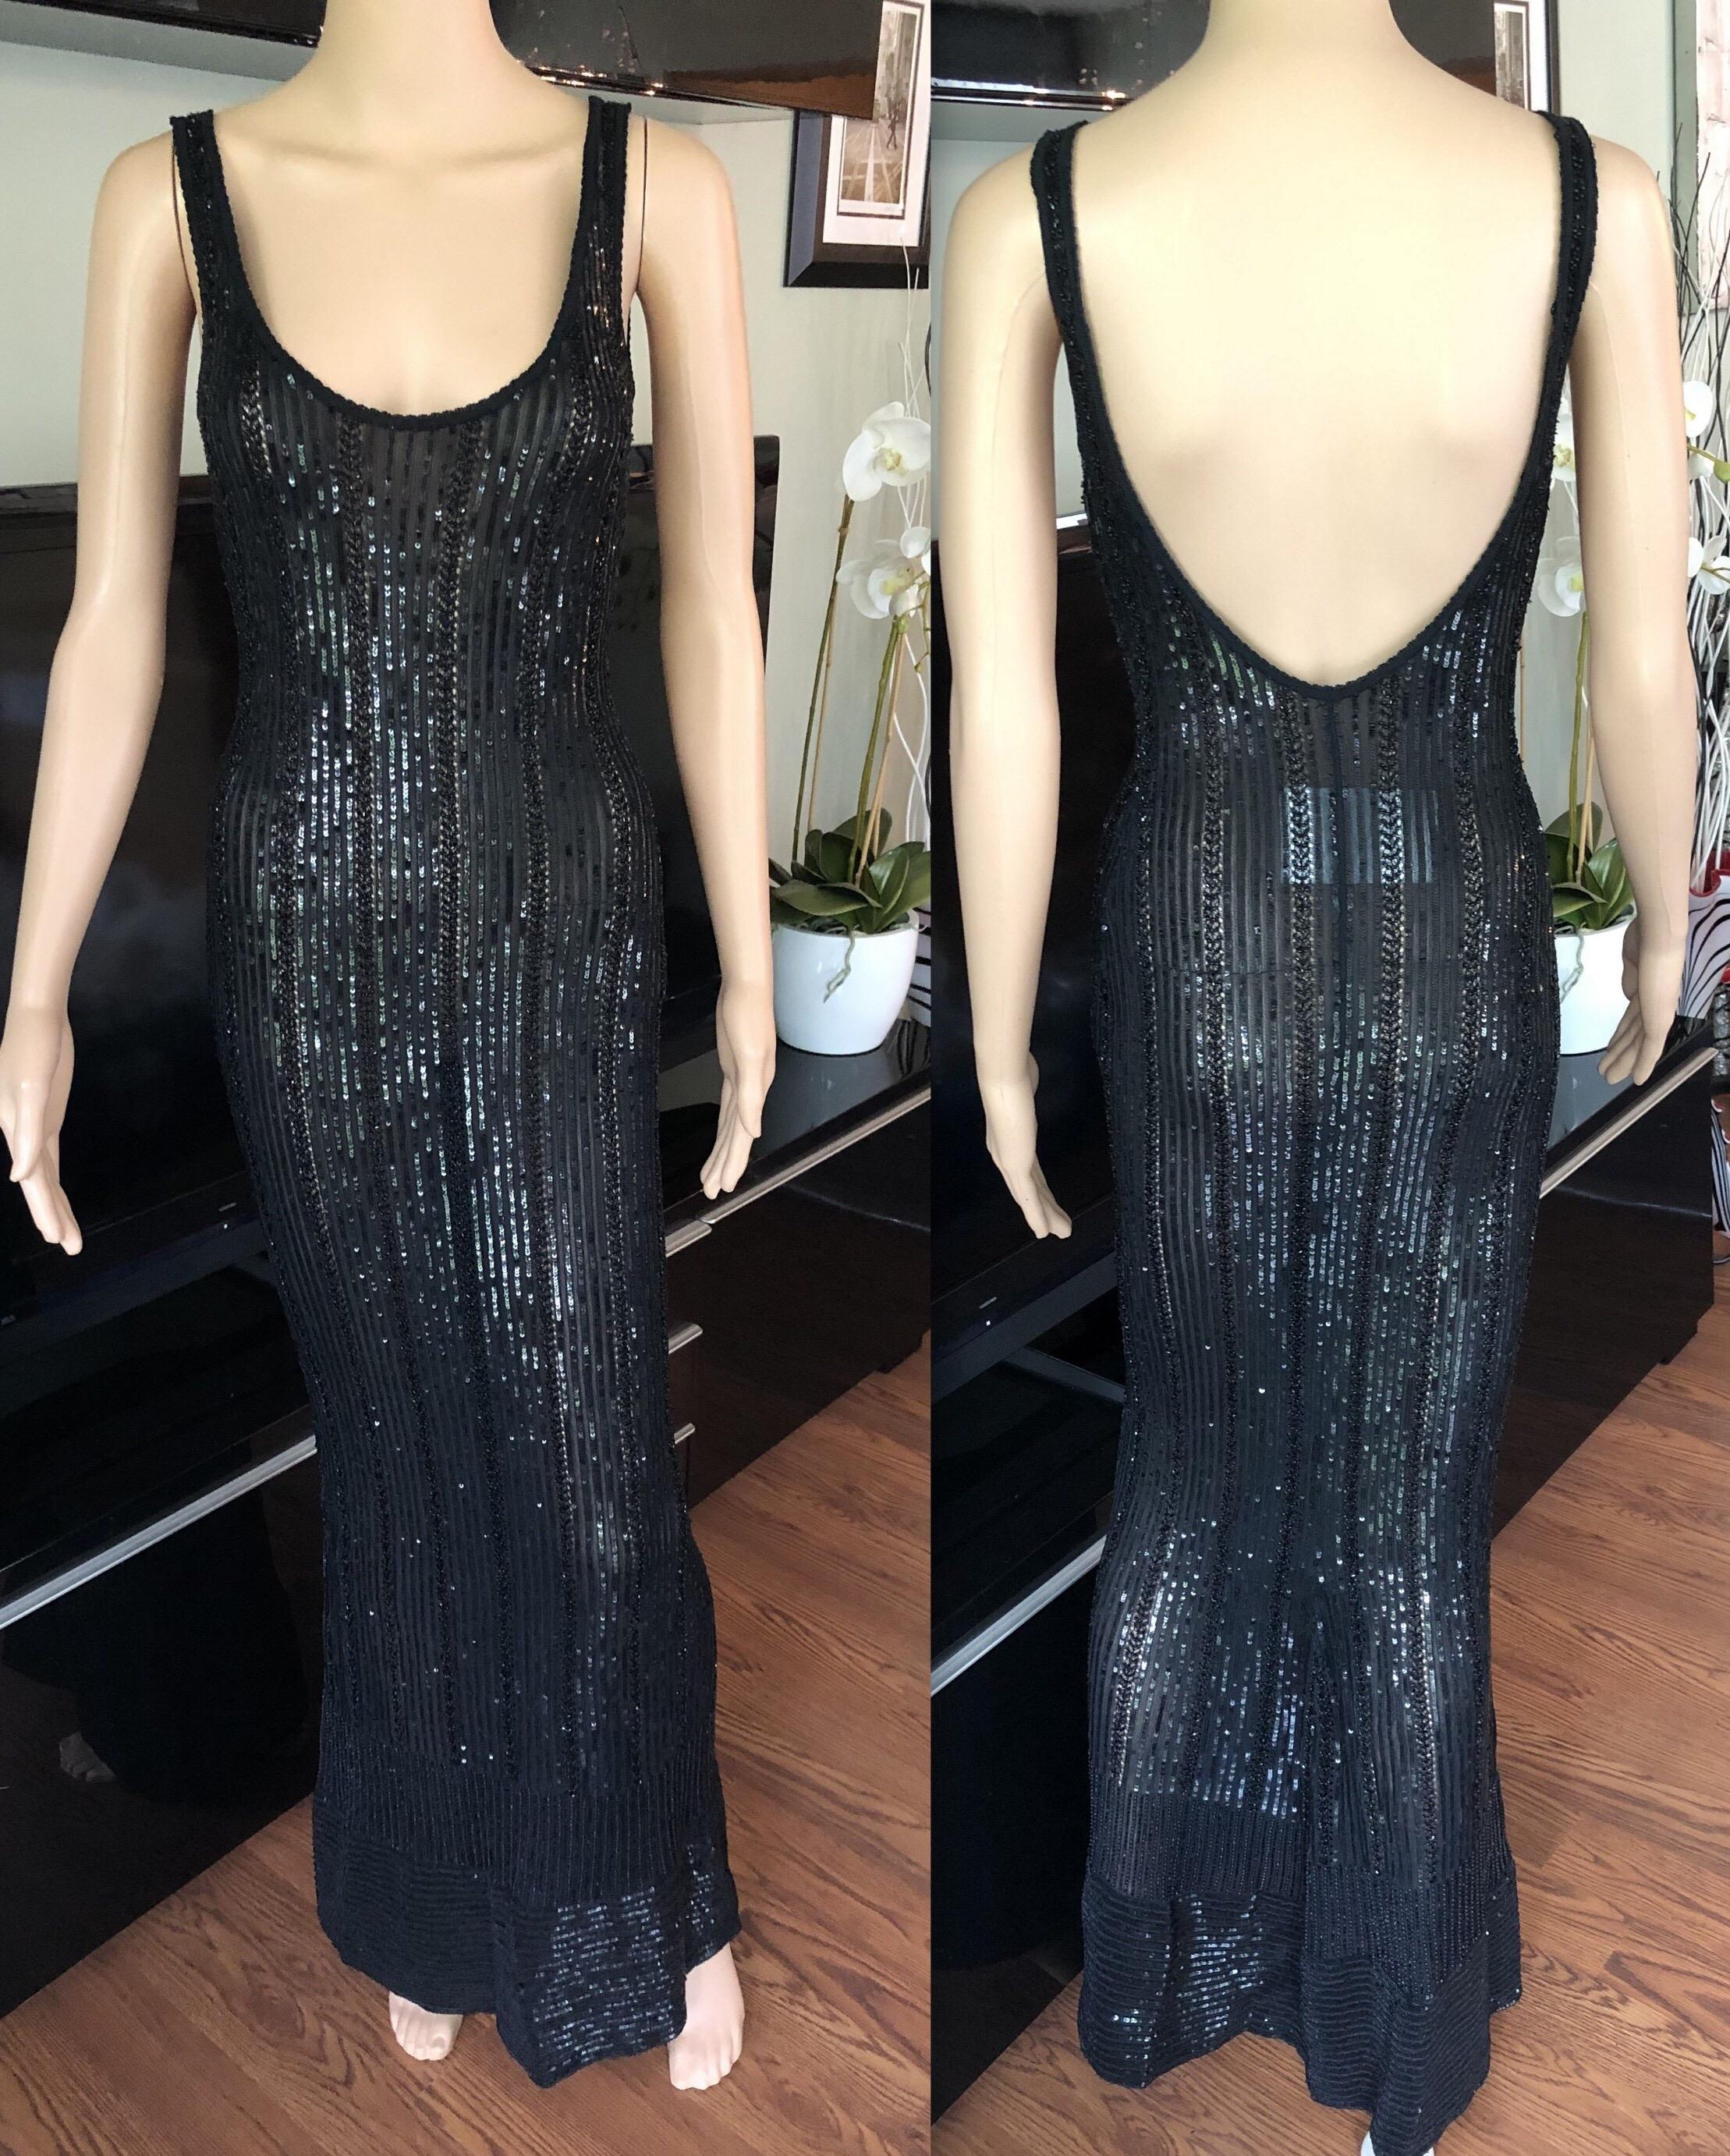 Azzedine Alaia Vintage S/S 1996 Runway Black Sequin Embellished Dress Gown For Sale 2